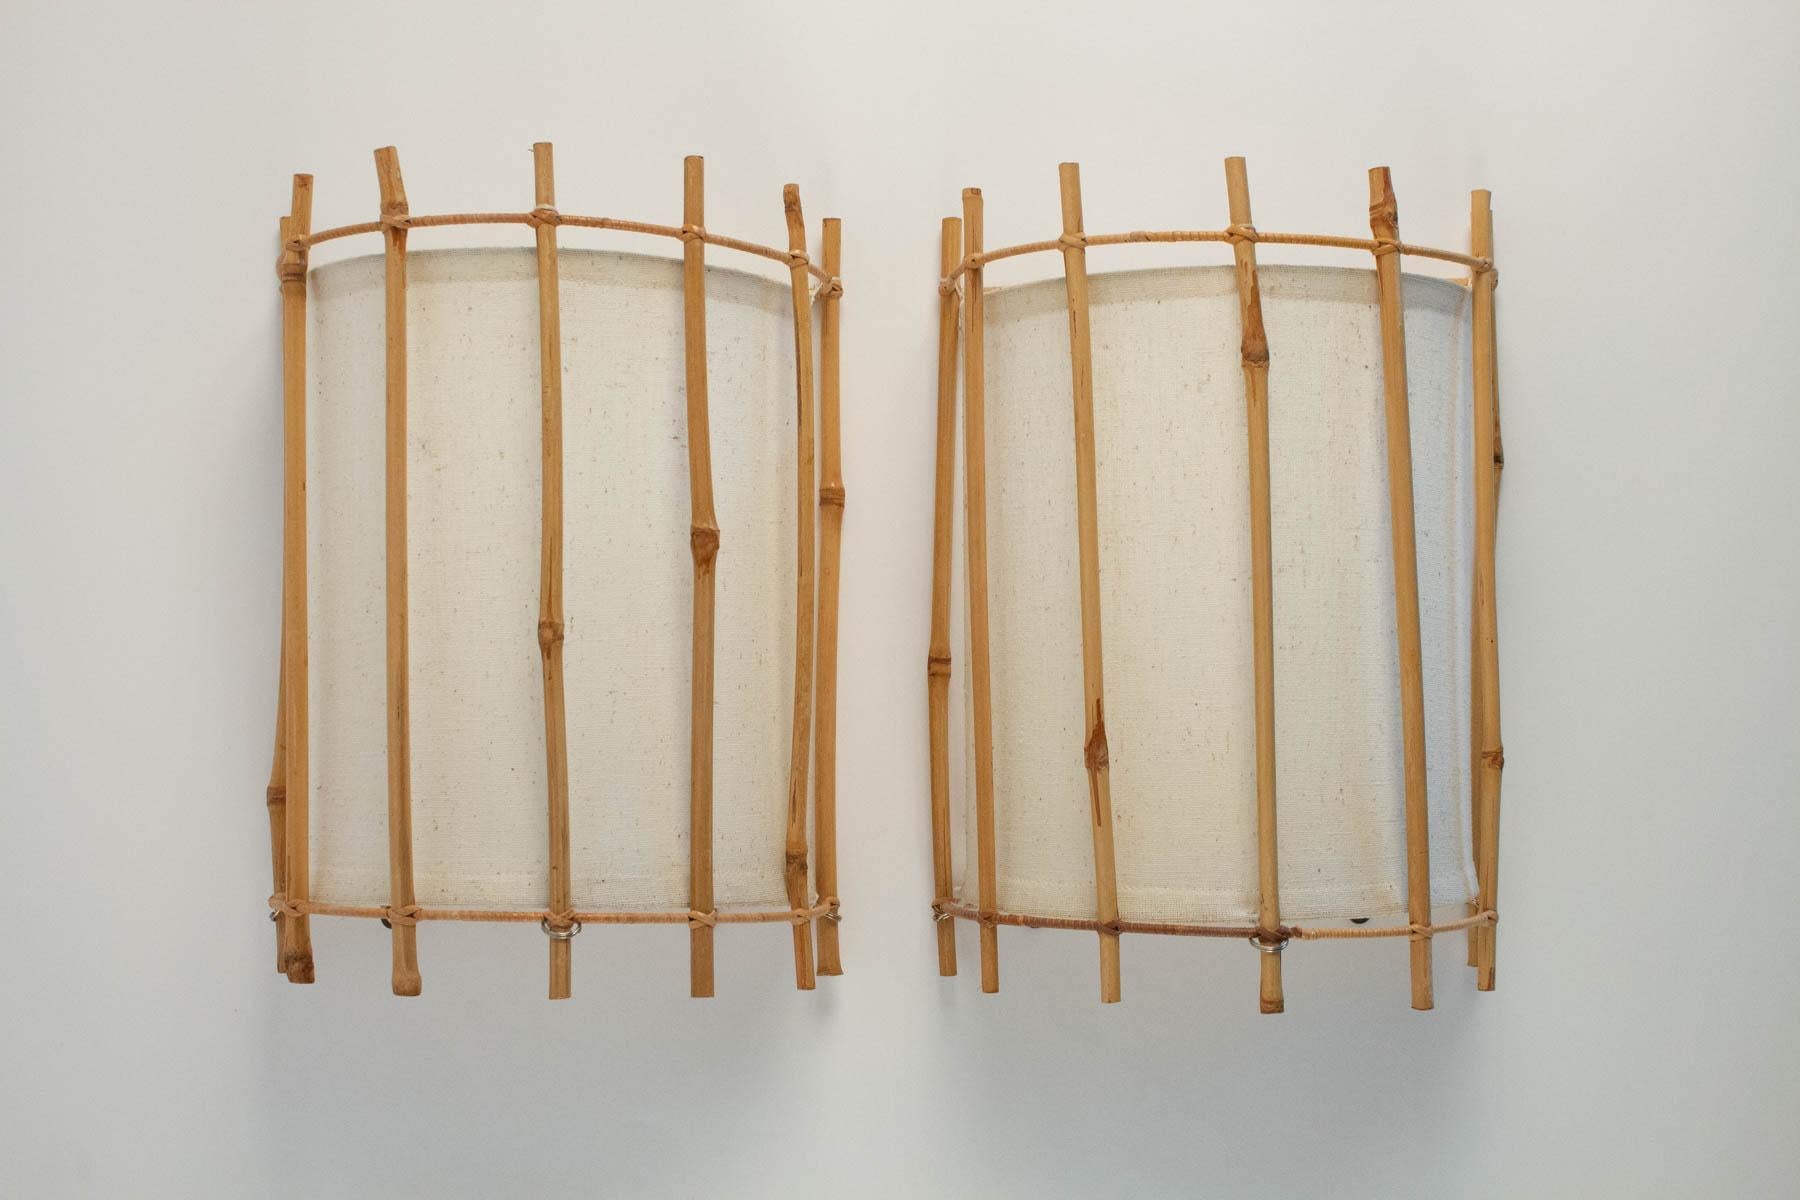 Pair of 1950s rattan sconces by Louis Sognot. Fine vertical rattan wands thighed with two horizontally curved rattan wands. Off-white cotton lampshades. One lighted arm per sconce.